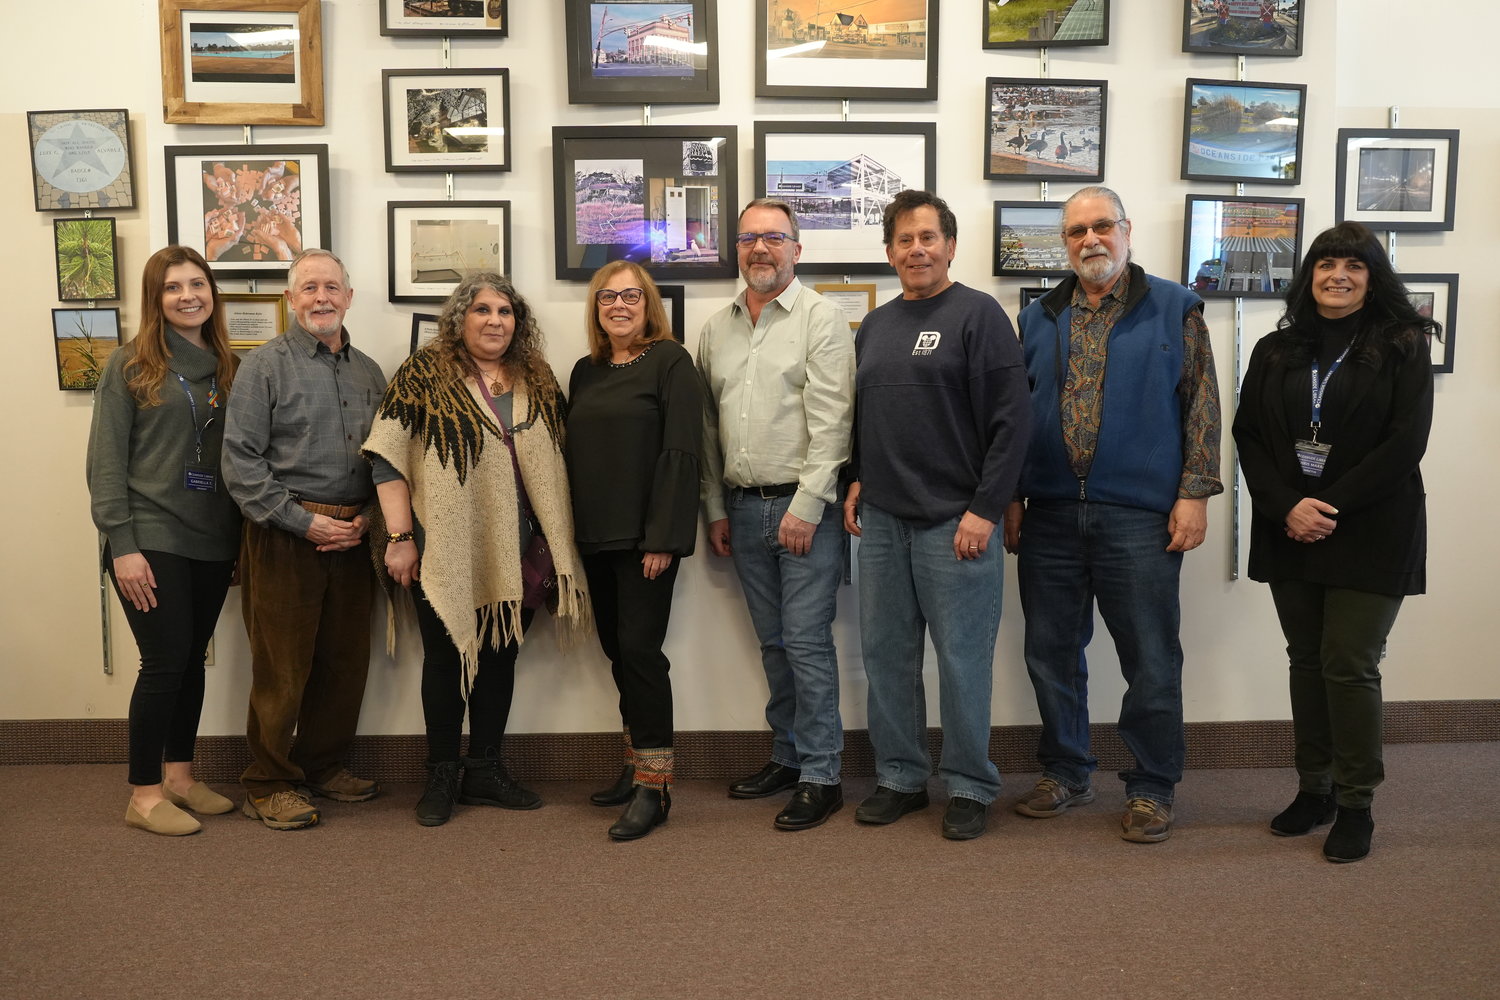 Librarian Gabriella Trinchetta, on left, next to six local artists displaying their work at the Photography Club art reception at the Oceanside Library, with library director Chris Marra, far right.